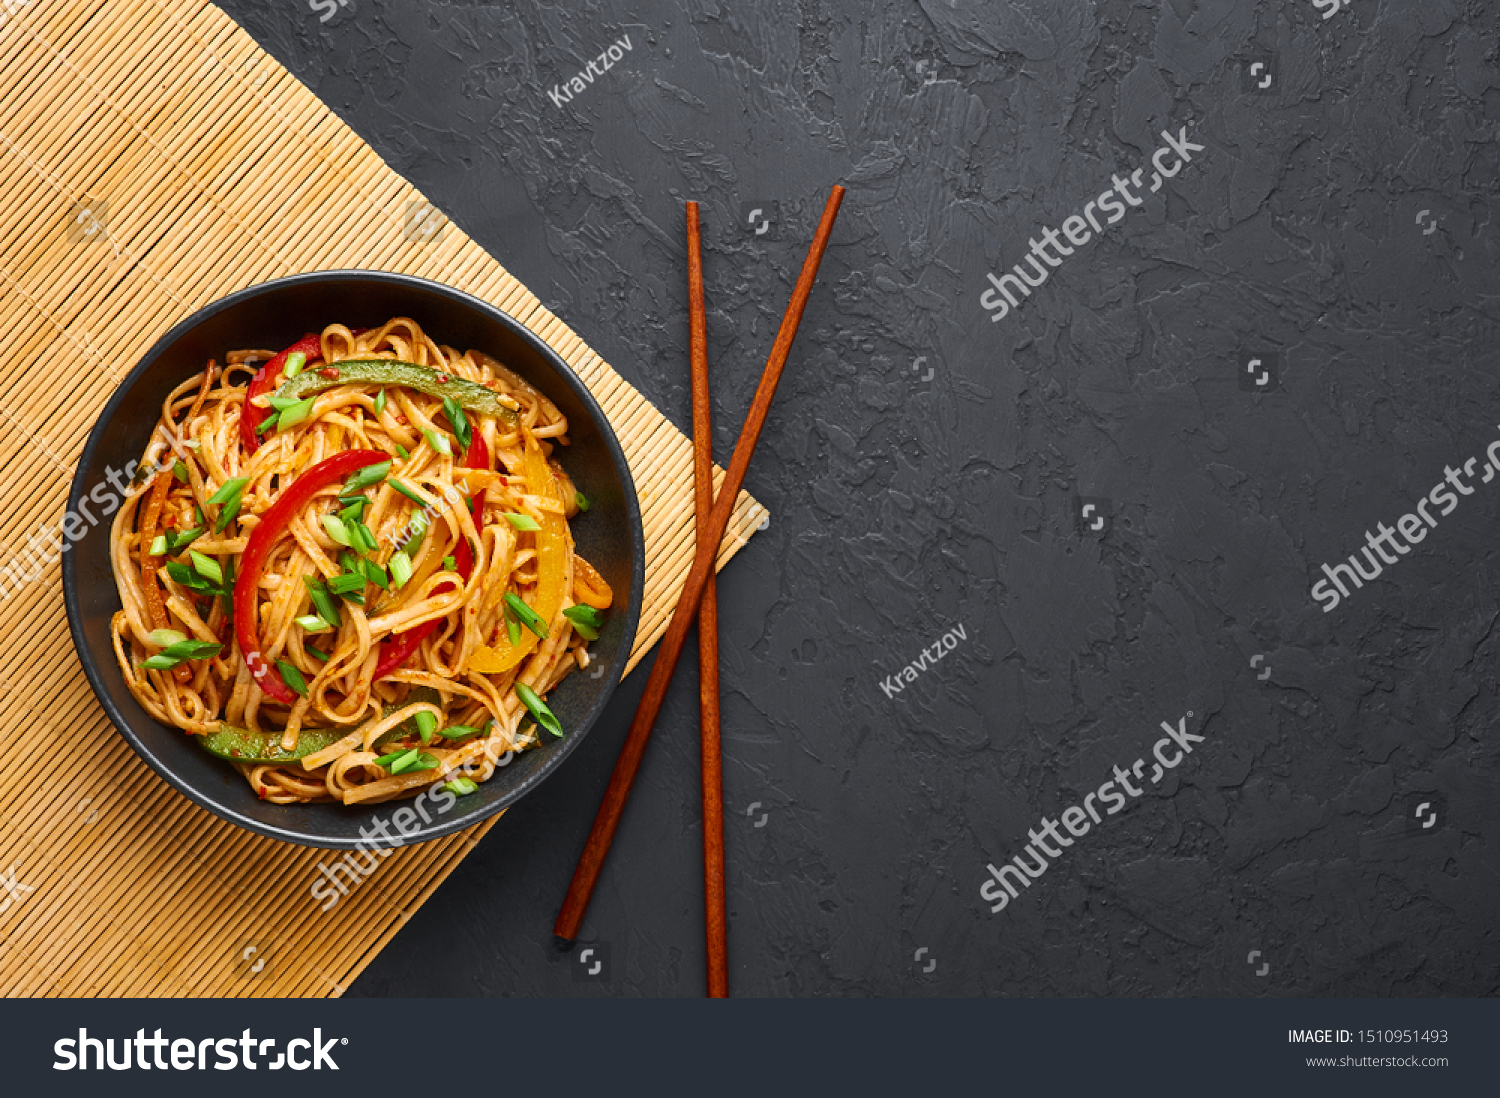 Vegetarian Schezwan Noodles or Vegetable Hakka Noodles or Chow Mein in black bowl at dark background. Indo-chinese cuisine hot dish with udon noodles, vegetables and chilli sauce. Copy space #1510951493